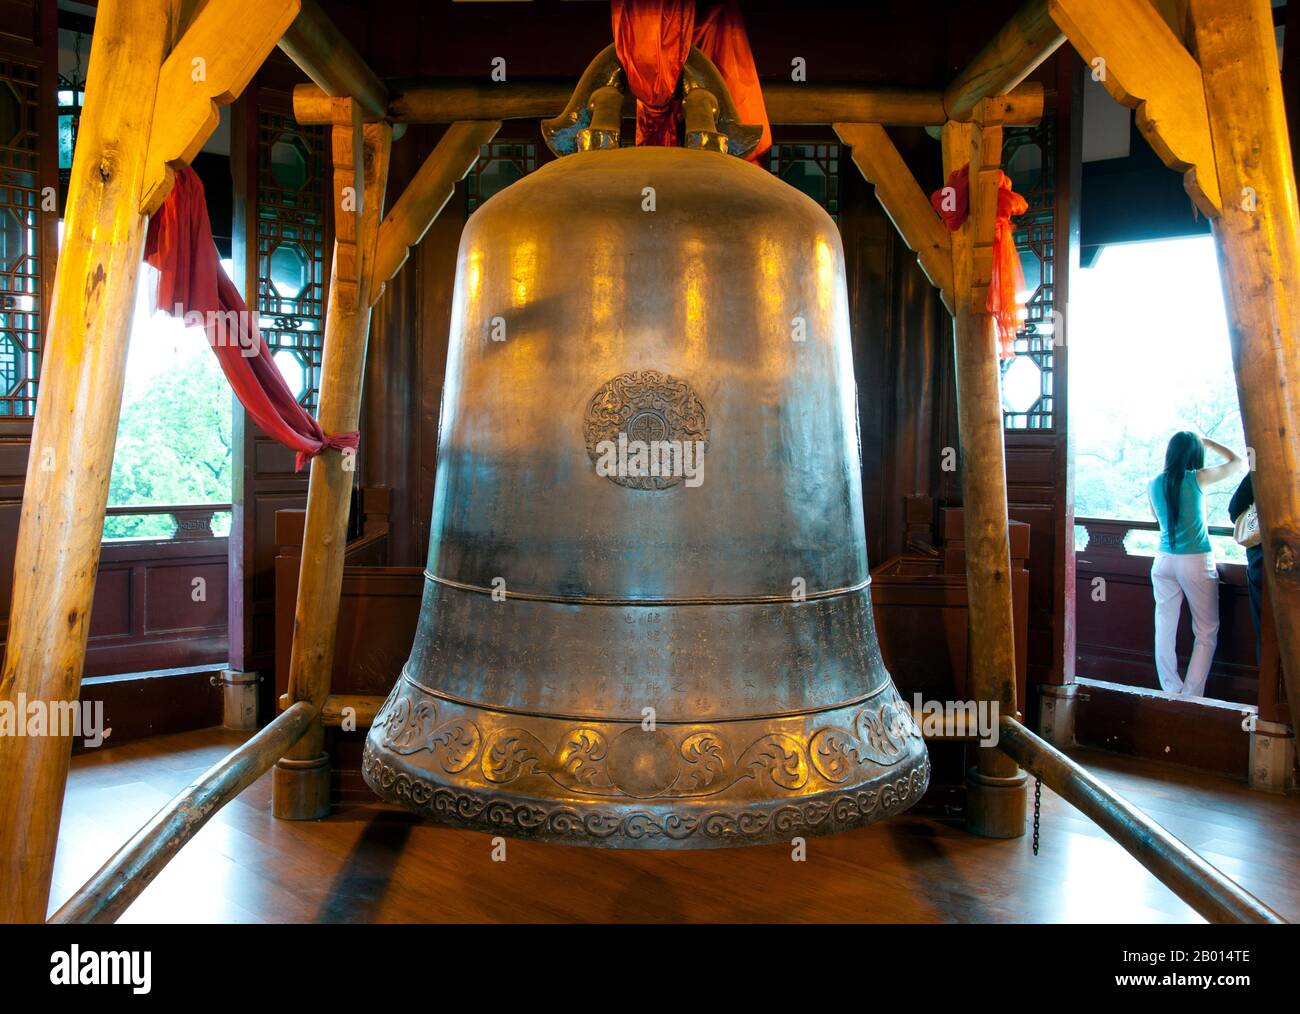 China: Bell in the Ten Thousand Buddha Pagoda, Du Fu Caotang (Du Fu's Thatched Cottage), Chengdu, Sichuan Province.  Du Fu (Dù Fǔ; Wade–Giles: Tu Fu, 712–770) was a prominent Chinese poet of the Tang Dynasty. Along with Li Bai (Li Bo), he is frequently called the greatest of the Chinese poets. In 759 Du Fu moved to Chengdu, built a thatched hut near the Flower Rinsing Creek and lived there for four years. The 'thatched hut' period was the peak of Du Fu's creativity. He wrote two hundred and forty poems, among them: 'My Thatched Hut was torn apart by Autumn Wind' and 'The Prime Minister of Shu' Stock Photo